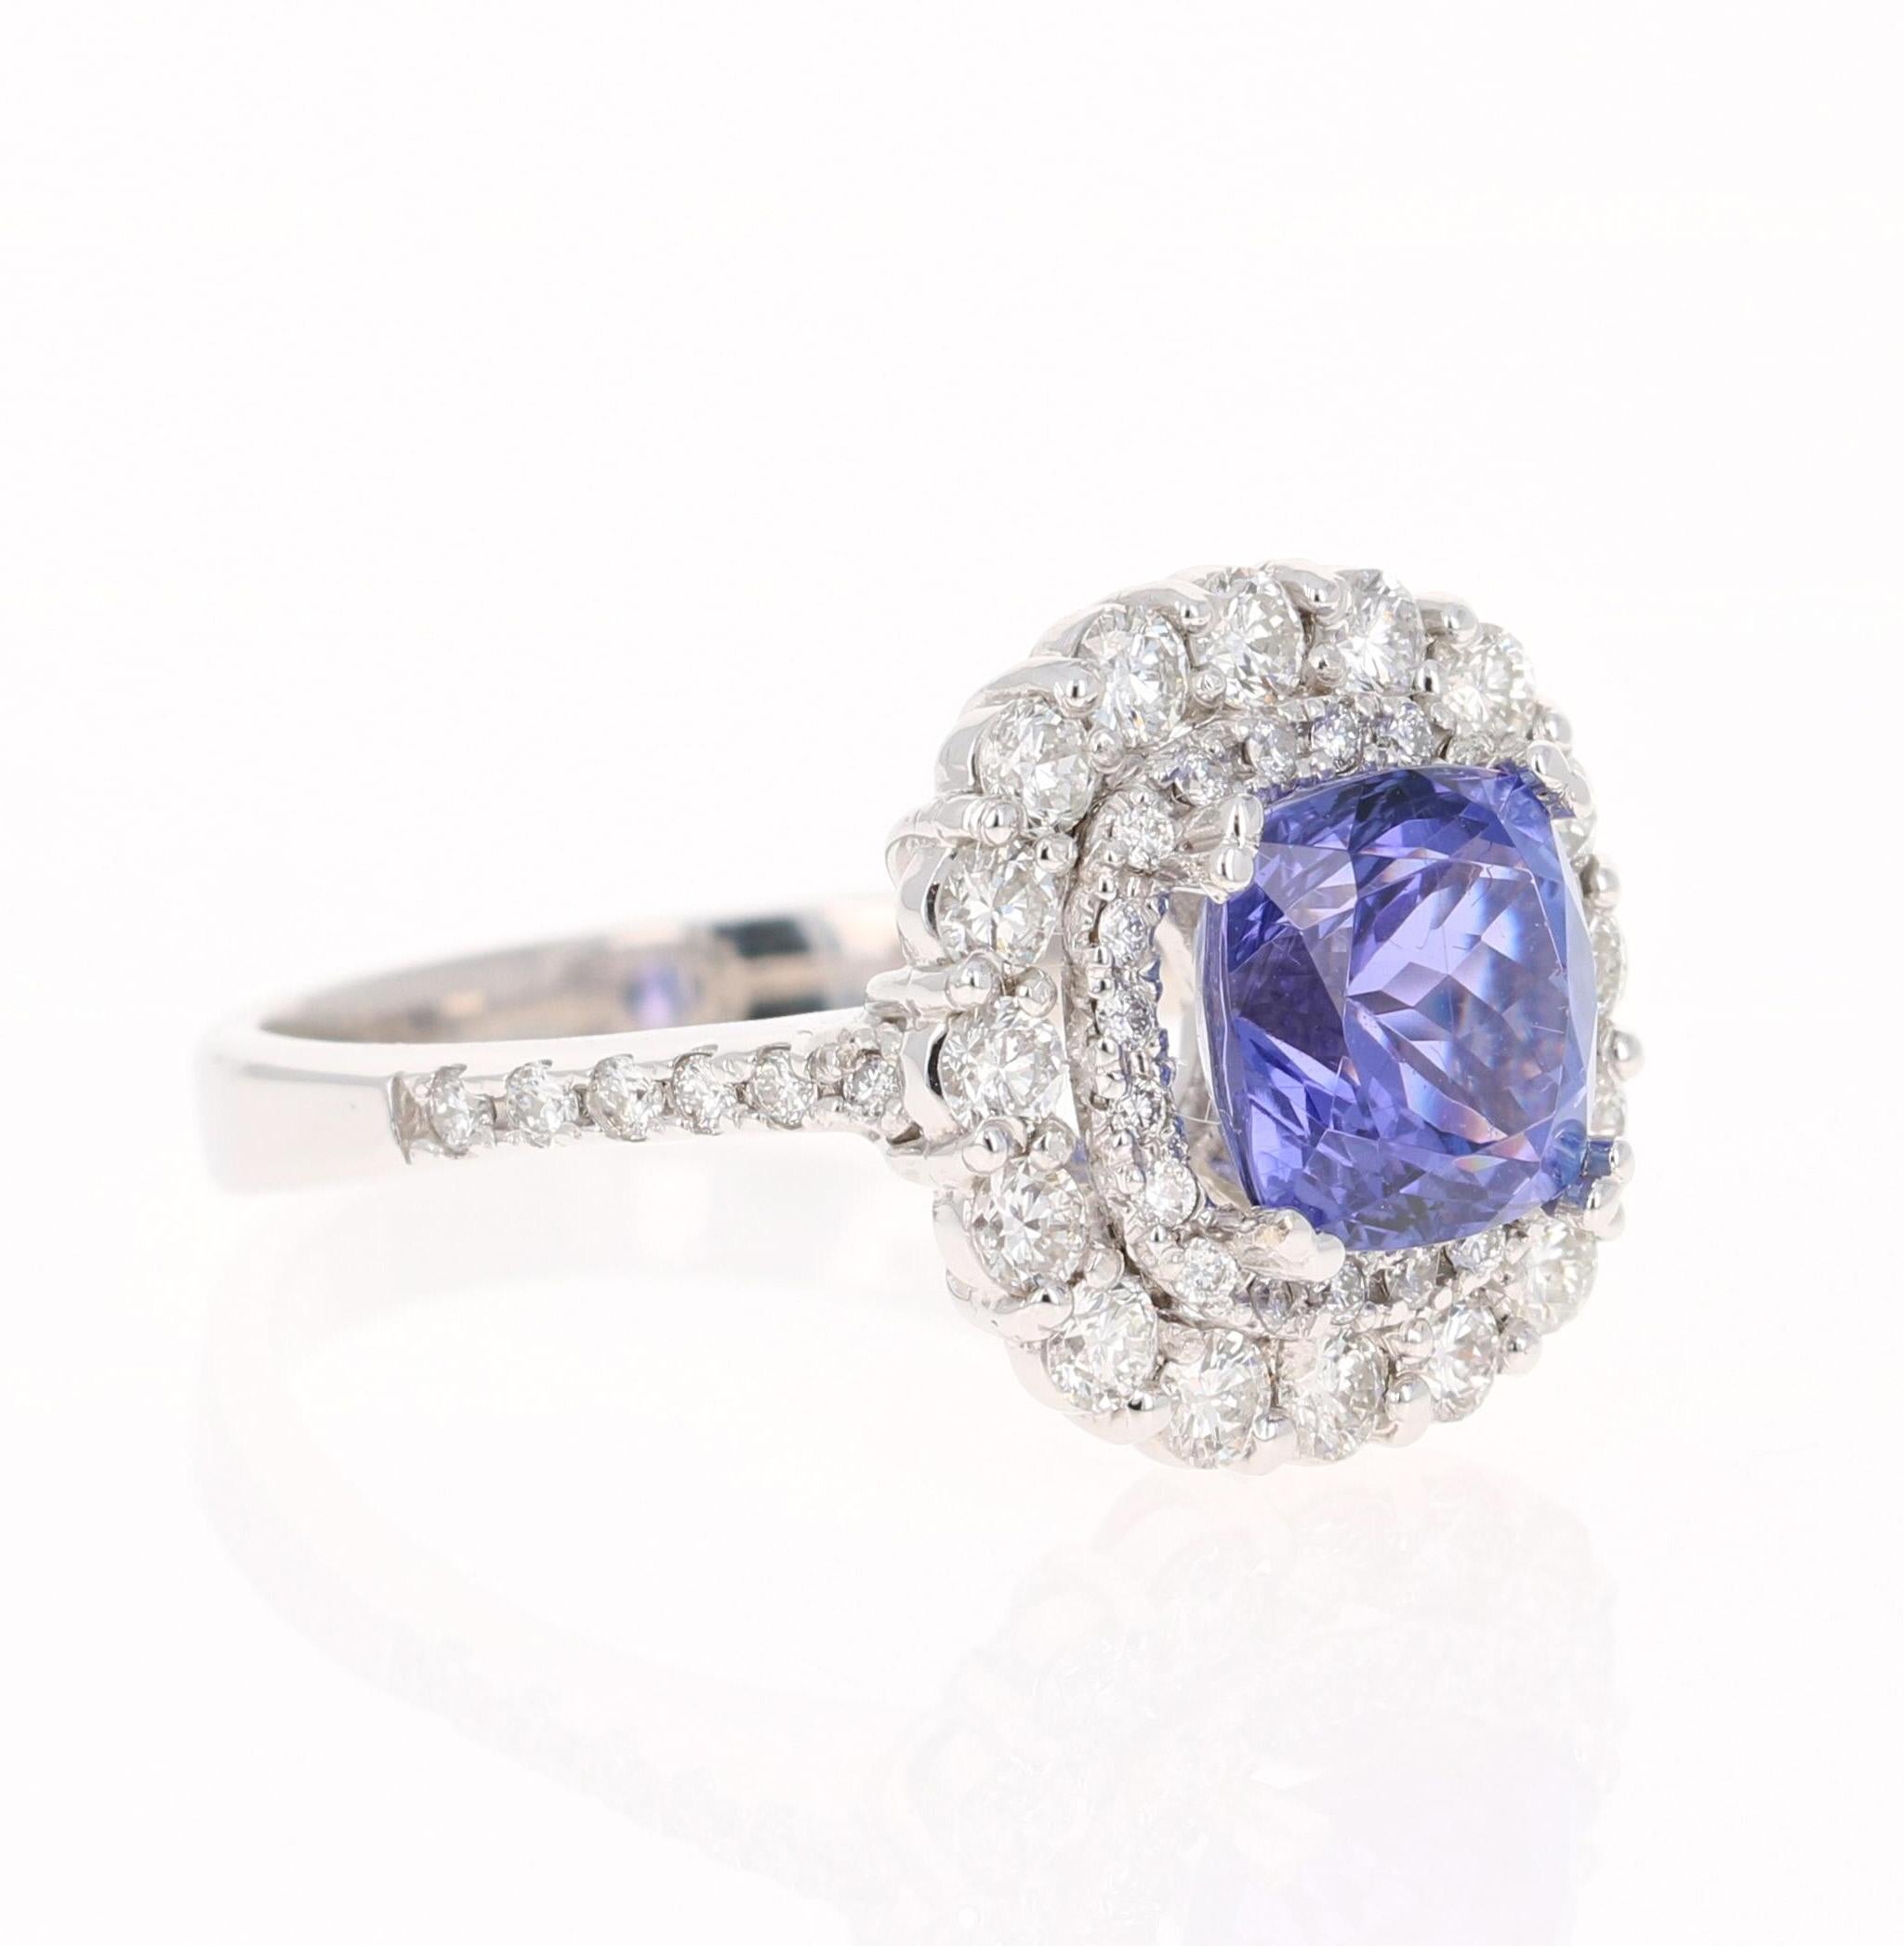 This gorgeous ring has a 2.76 Carat Cushion Cut Tanzanite that is set in the center of the ring. The Tanzanite is surrounded by 2 rows of 47 Round Cut Diamonds that weigh 1.07 carats (Clarity: VS2, Color: F)  The total carat weight of the ring is